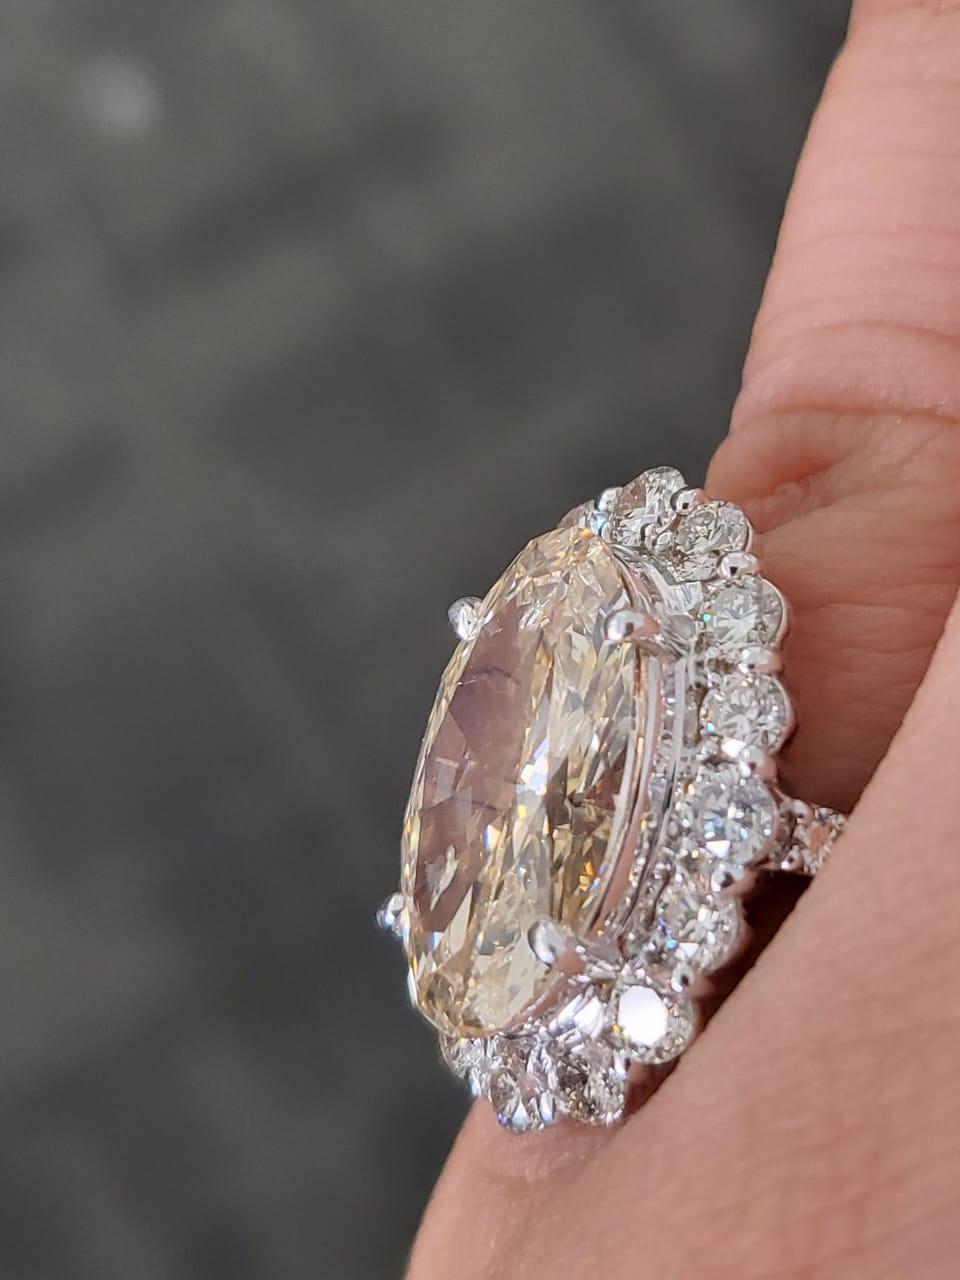 A very beautiful and stunning, Diamonds Engagement Ring set in Platinum 900 & Diamonds. The weight of the centre oval Diamond is 6.15 carats. The colour of the Diamond is under S - Slight Yellow Brown. The clarity of the Diamond is SI2. The Diamond